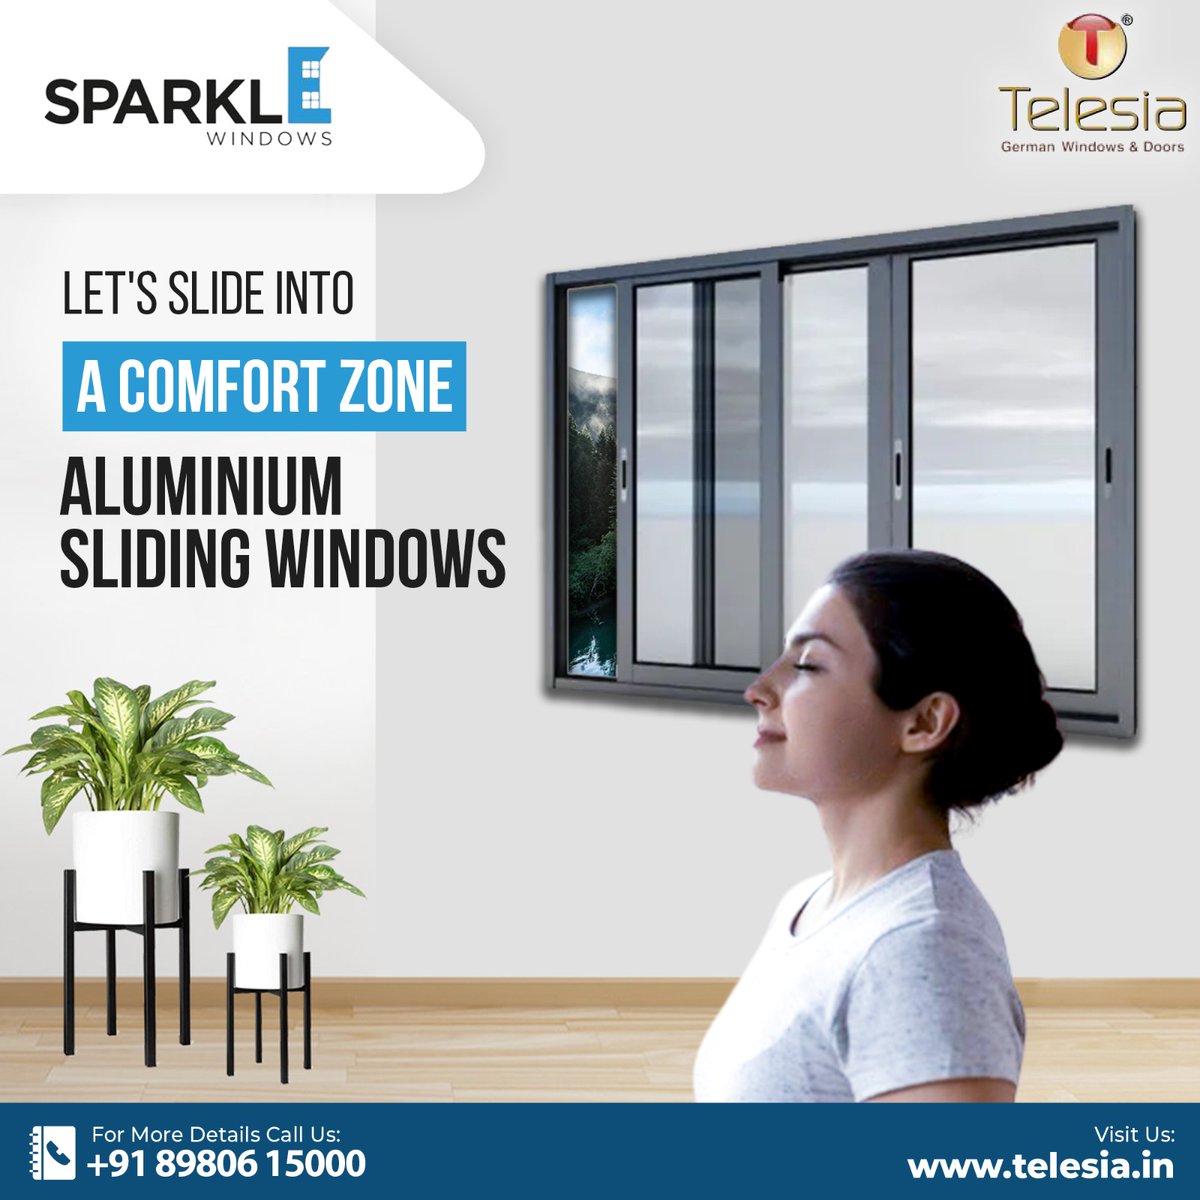 Let the light shine in with Sparkle Windows' Aluminium Sliding Windows ✨🏠 Brighten up your space with our sleek and stylish windows. 

#SparkleWindows #SlidingWindows #AluminiumWindows #HomeRenovation  #Ahmedabad